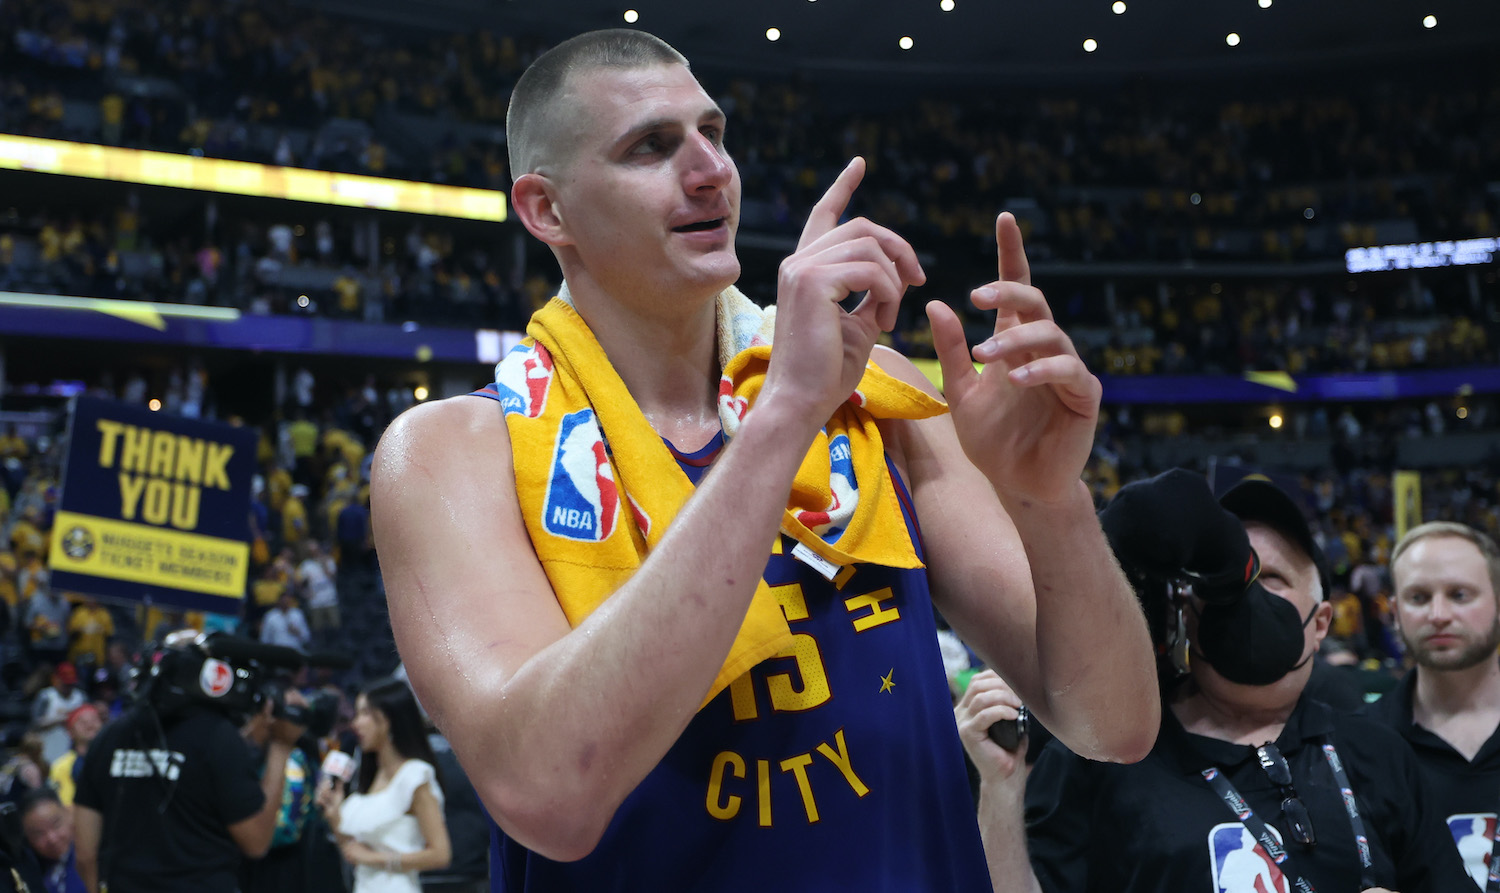 DENVER, COLORADO - JUNE 01: Nikola Jokic #15 of the Denver Nuggets reacts after a 104-93 victory against the Miami Heat in Game One of the 2023 NBA Finals at Ball Arena on June 01, 2023 in Denver, Colorado. NOTE TO USER: User expressly acknowledges and agrees that, by downloading and or using this photograph, User is consenting to the terms and conditions of the Getty Images License Agreement. (Photo by Matthew Stockman/Getty Images)